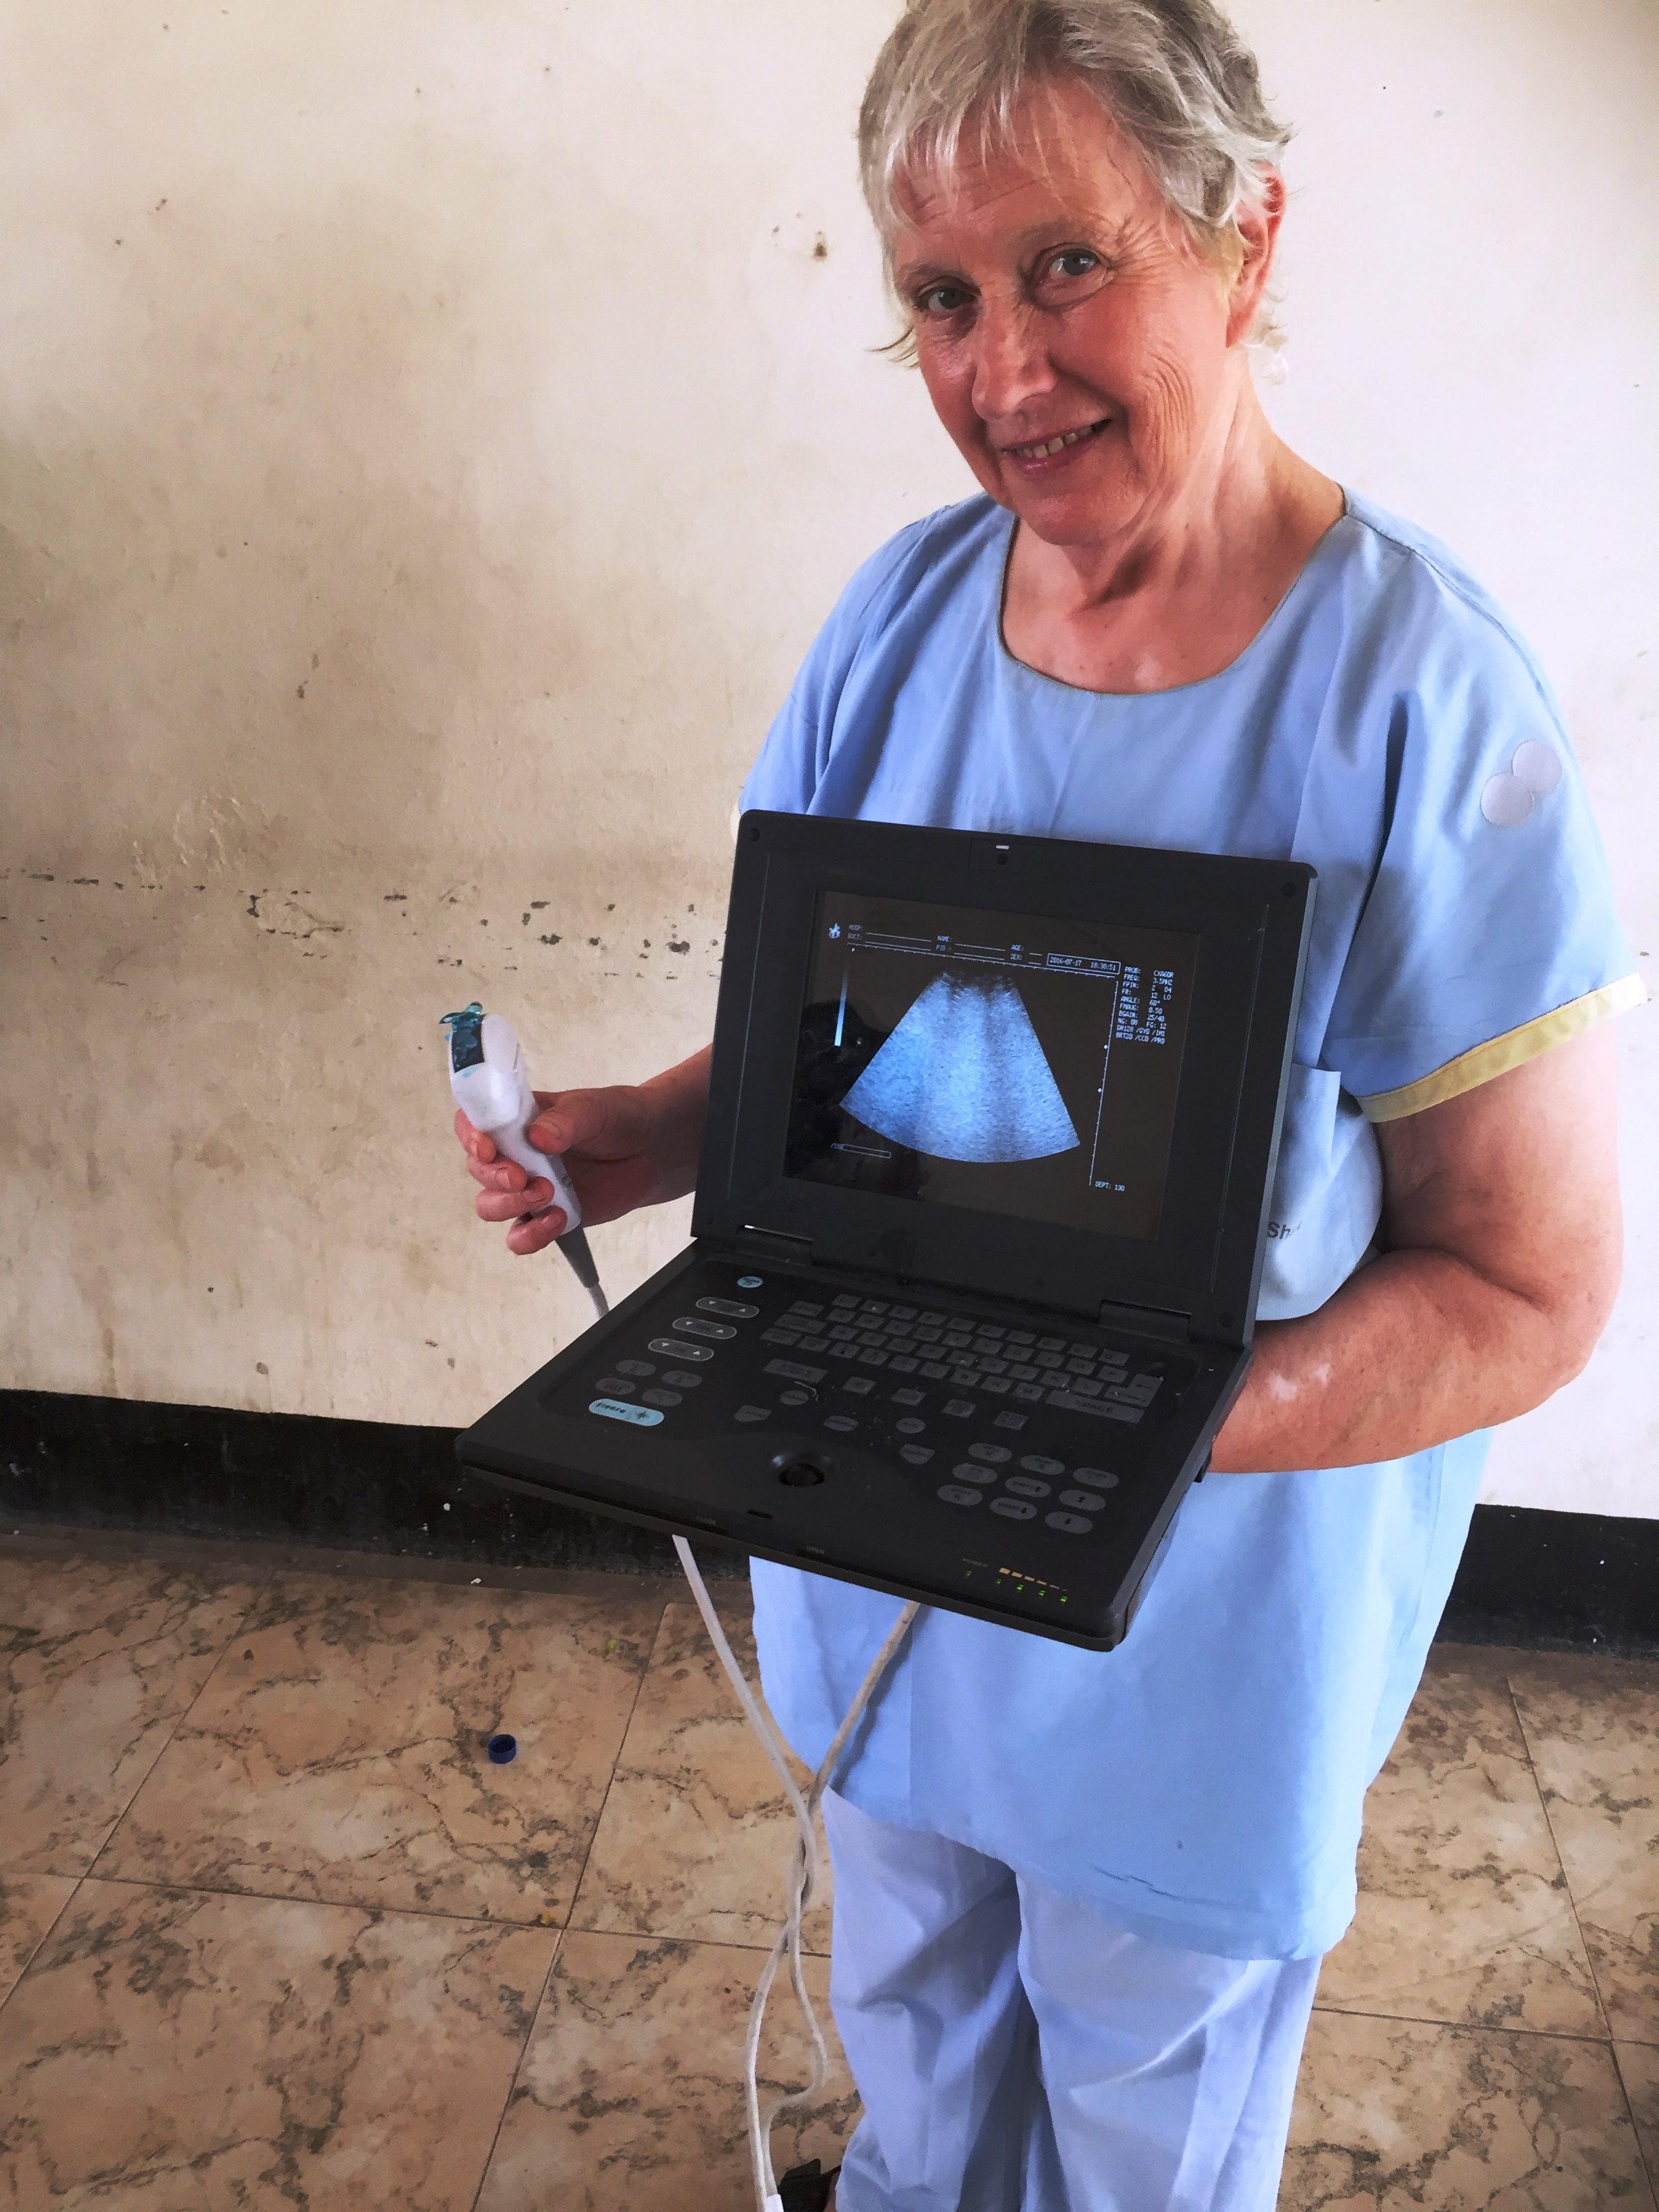 Dr. Margaret holds a portable ultrasound machine that was purchased with funds raised by the Can-Go Afar Foundation